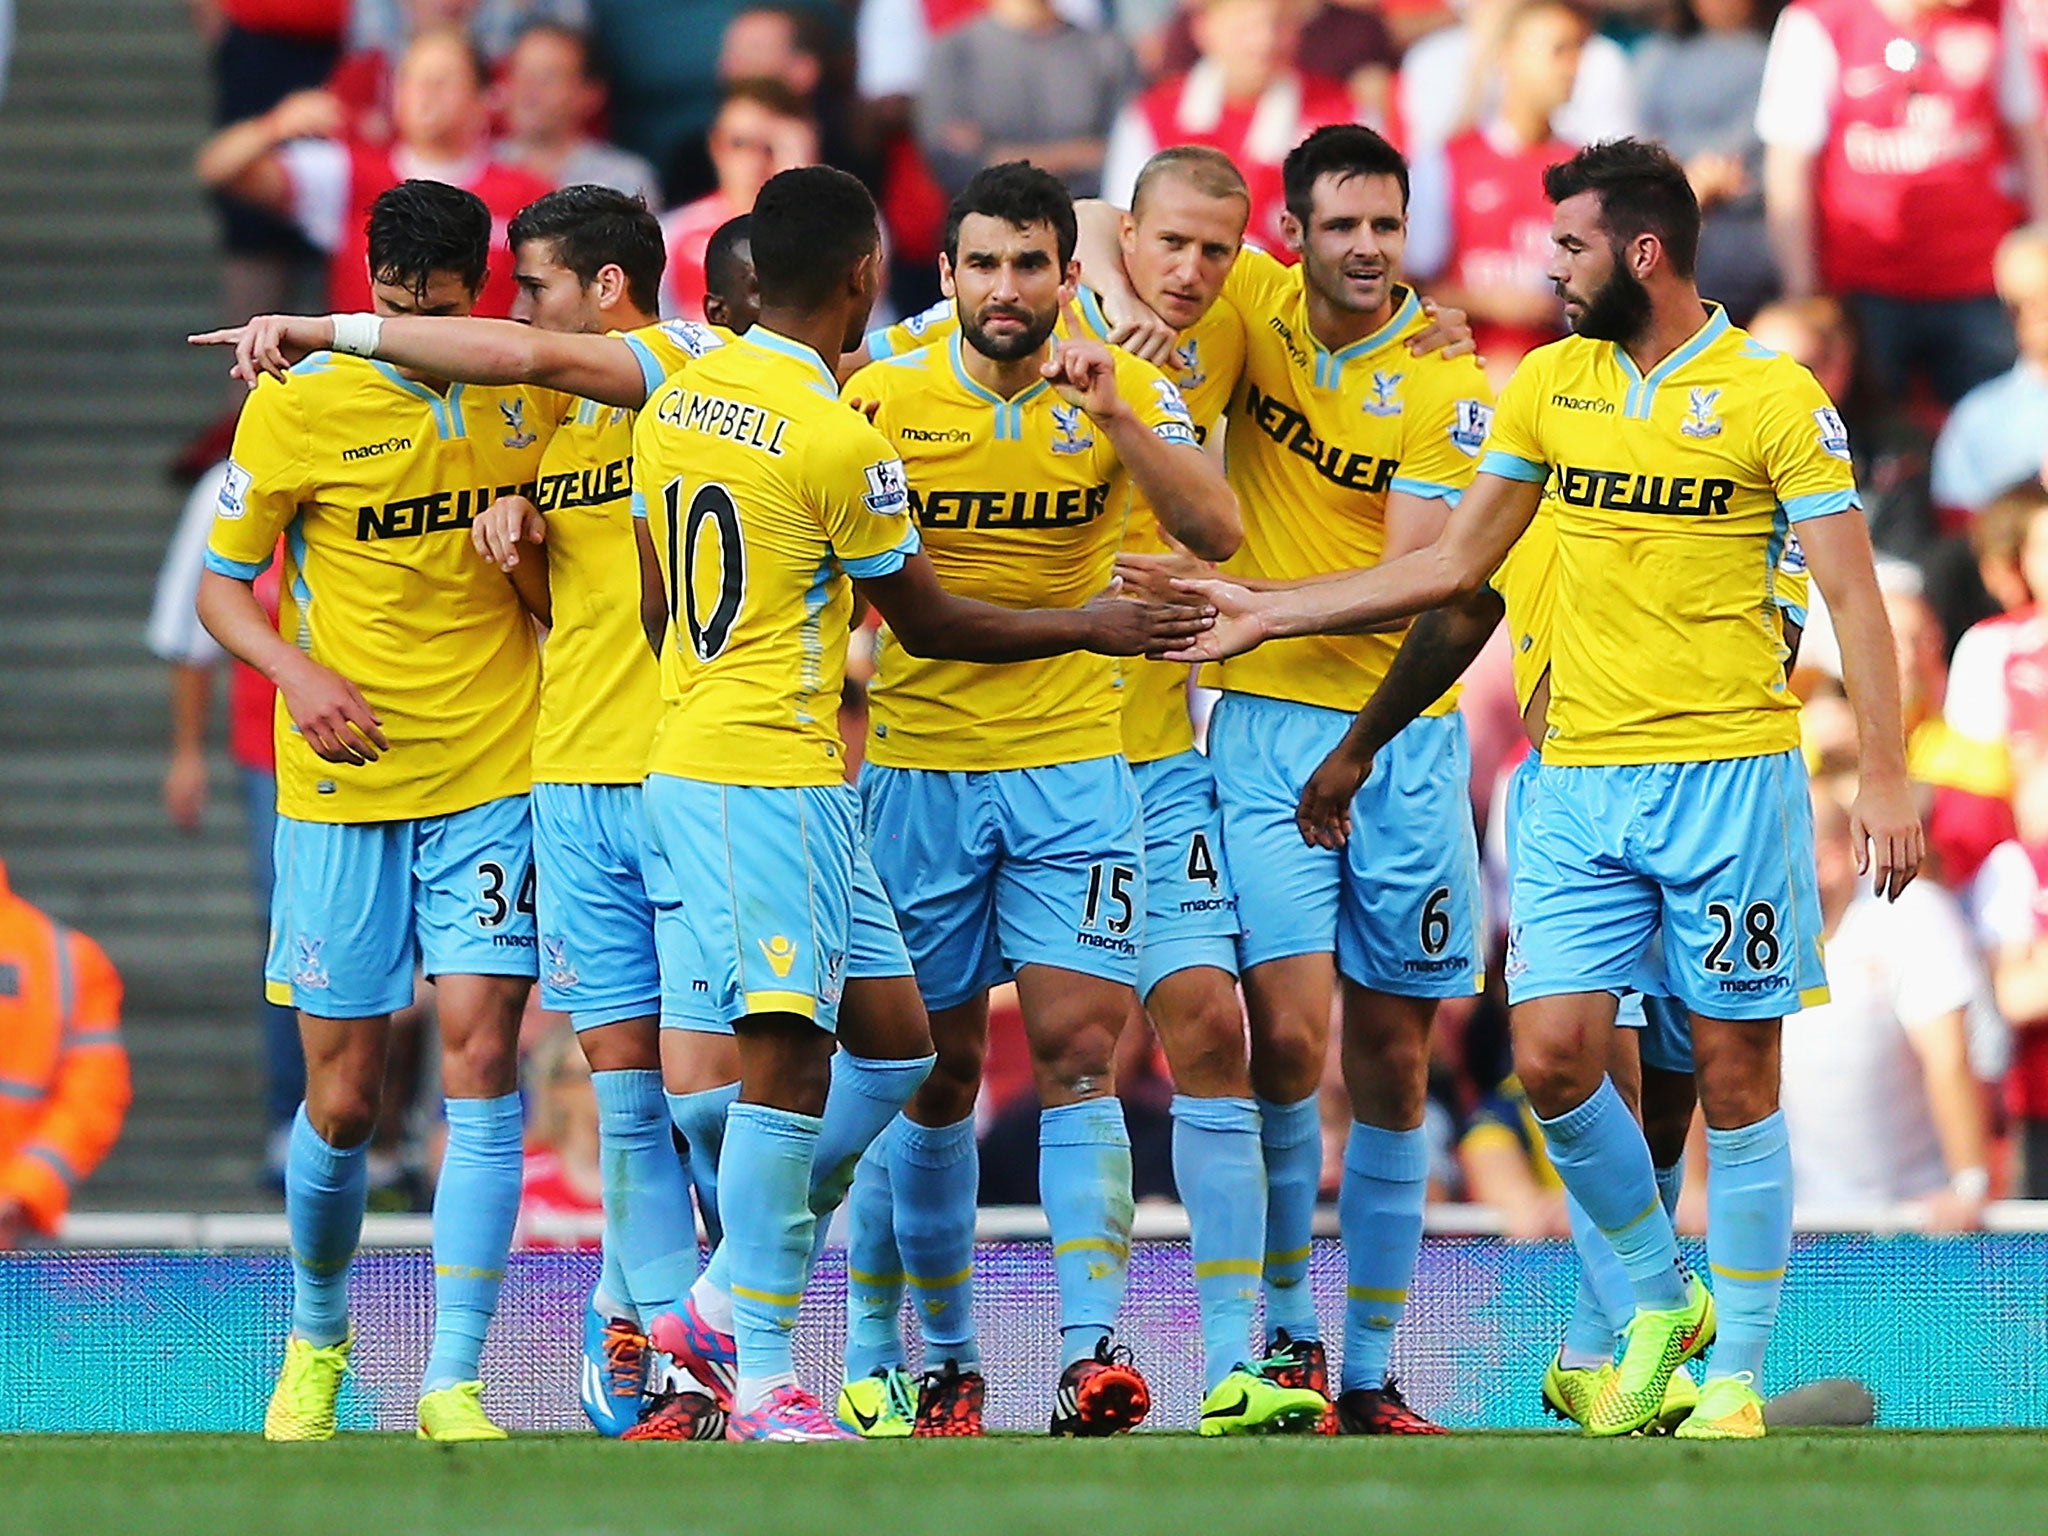 Crystal Palace players celebrate after Brede Hangeland made it 1-0 against Arsenal